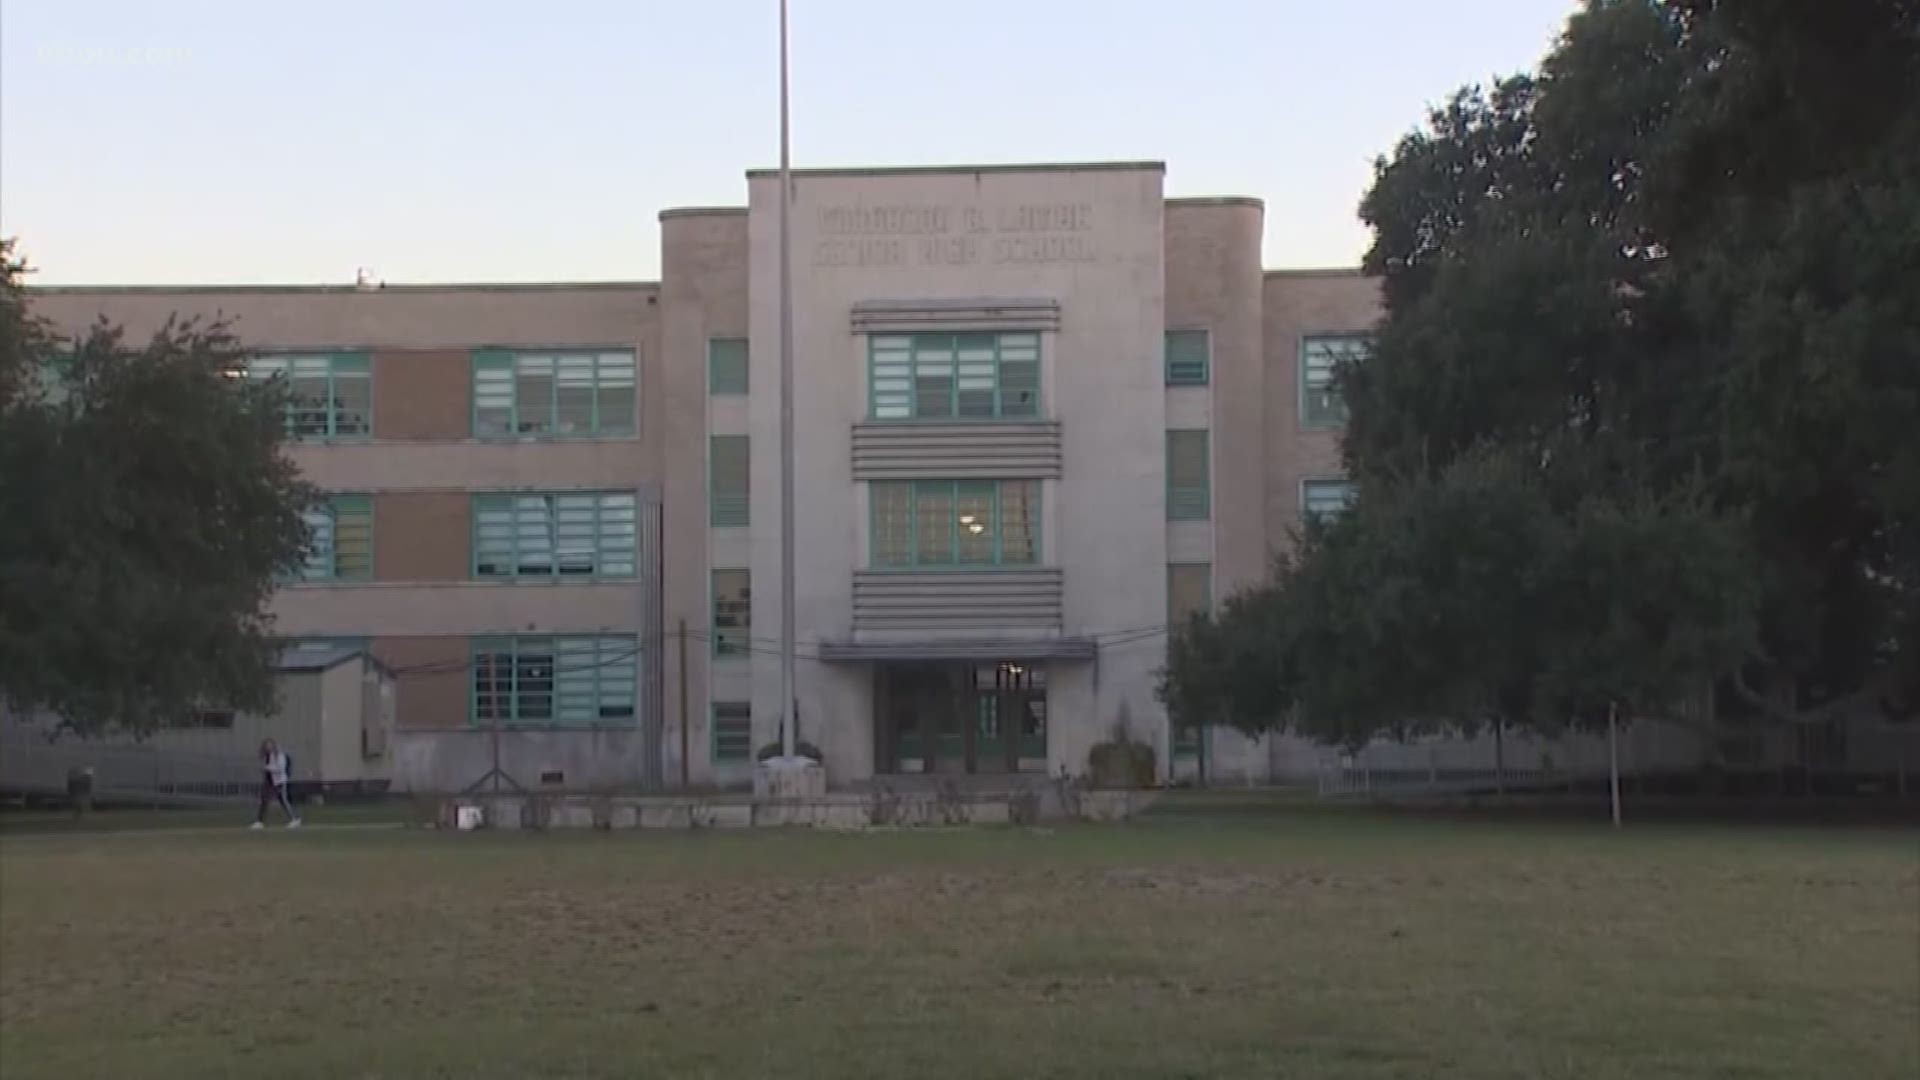 Lamar High School parents are demanding increased security following the shooting death of a student near campus this week.